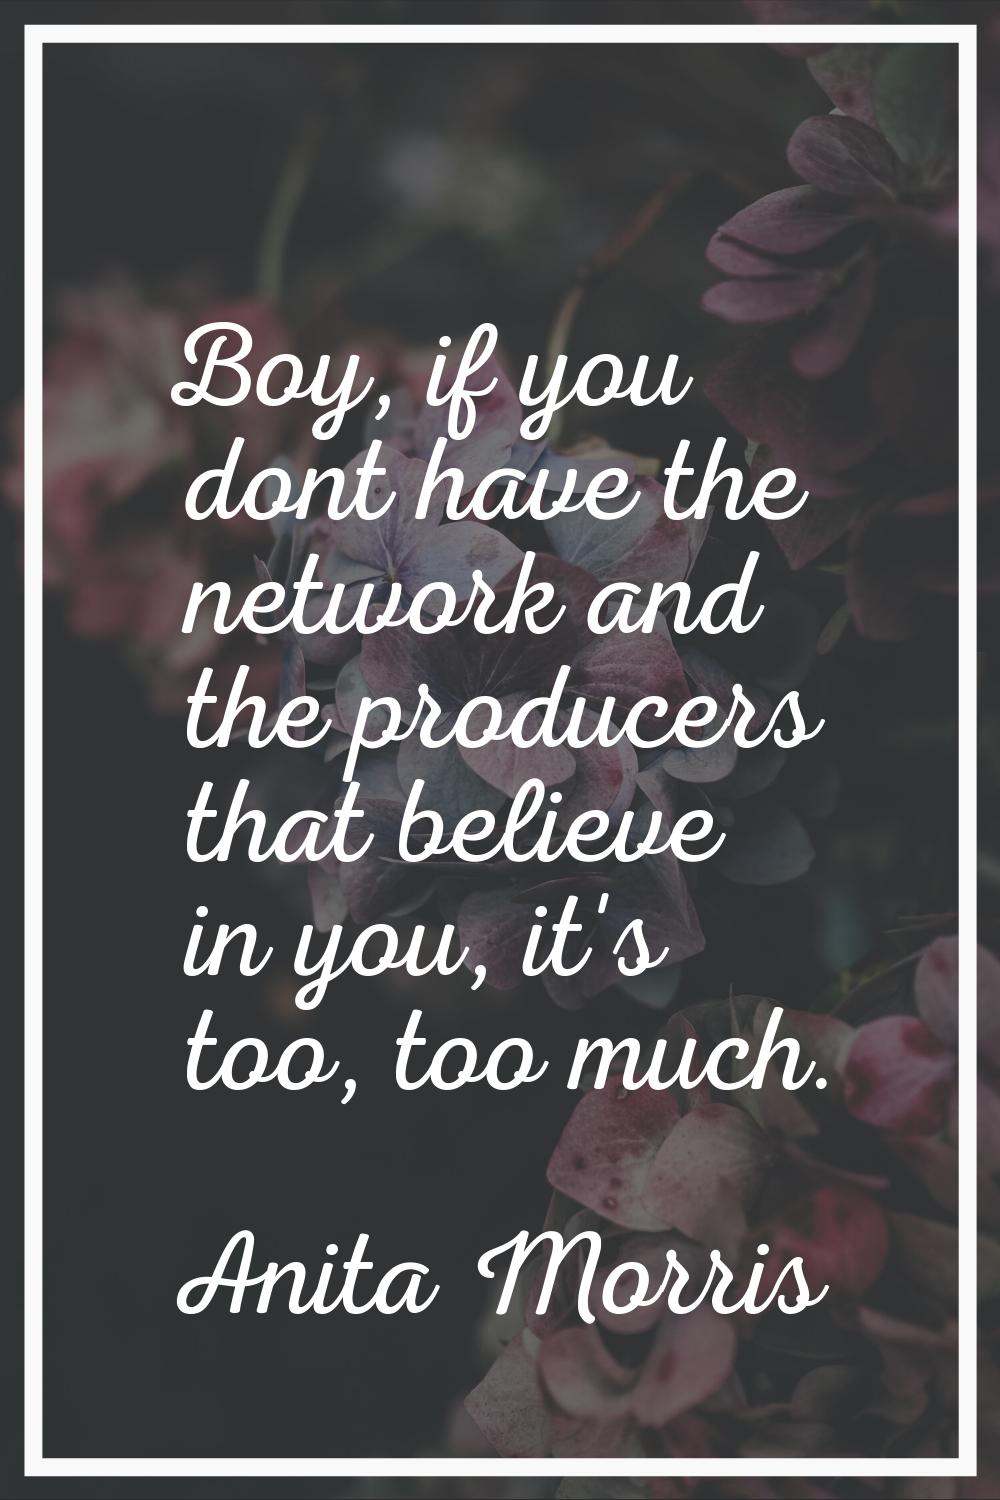 Boy, if you dont have the network and the producers that believe in you, it's too, too much.